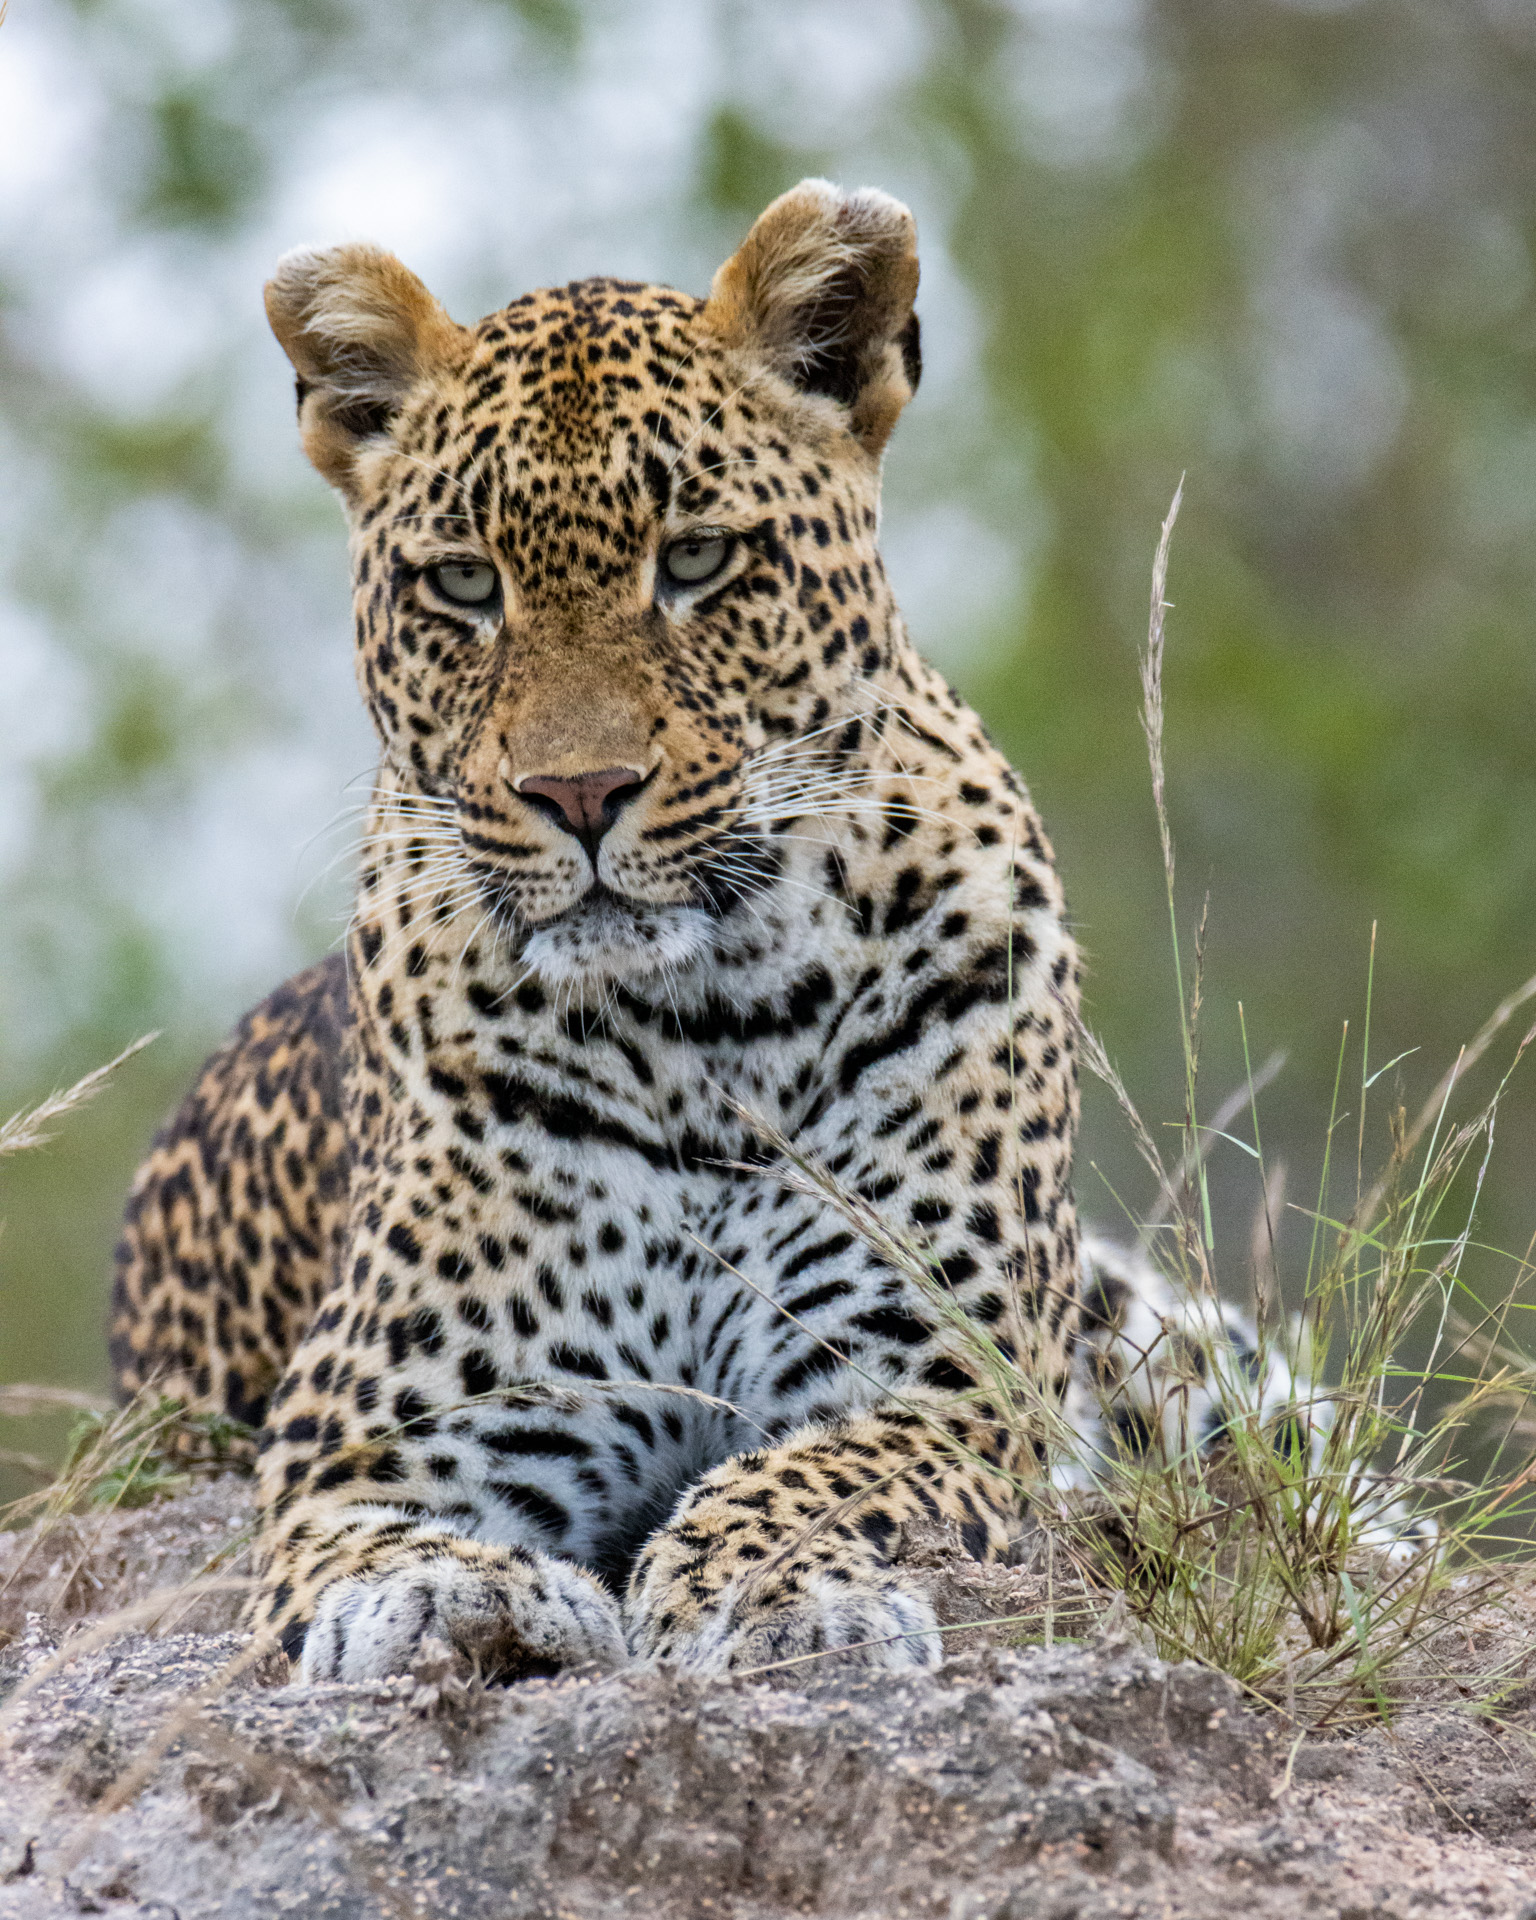 The Kruger has so many relaxed leopards